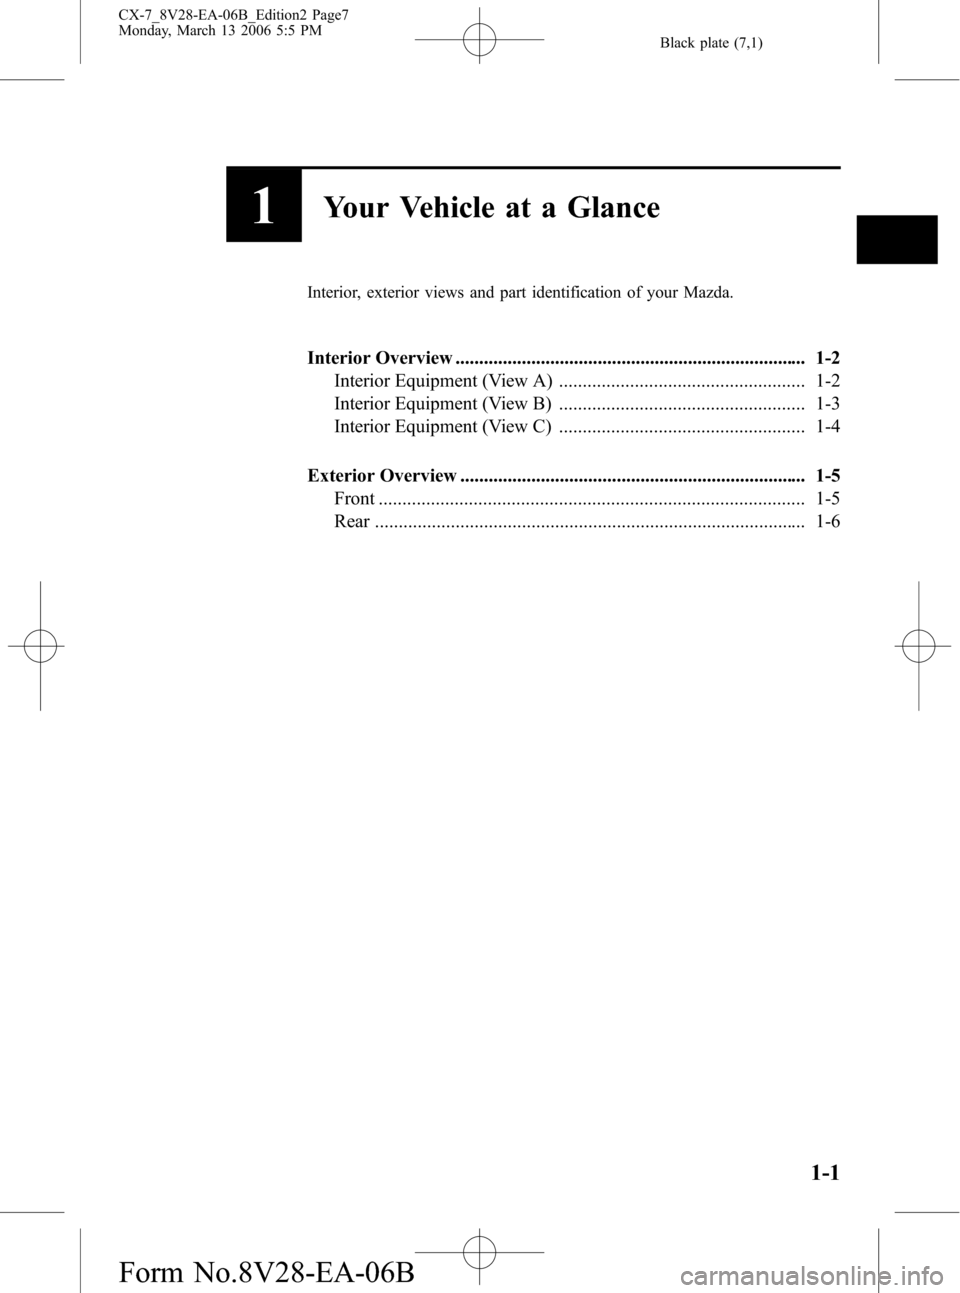 MAZDA MODEL CX-7 2007  Owners Manual (in English) Black plate (7,1)
1Your Vehicle at a Glance
Interior, exterior views and part identification of your Mazda.
Interior Overview ..........................................................................